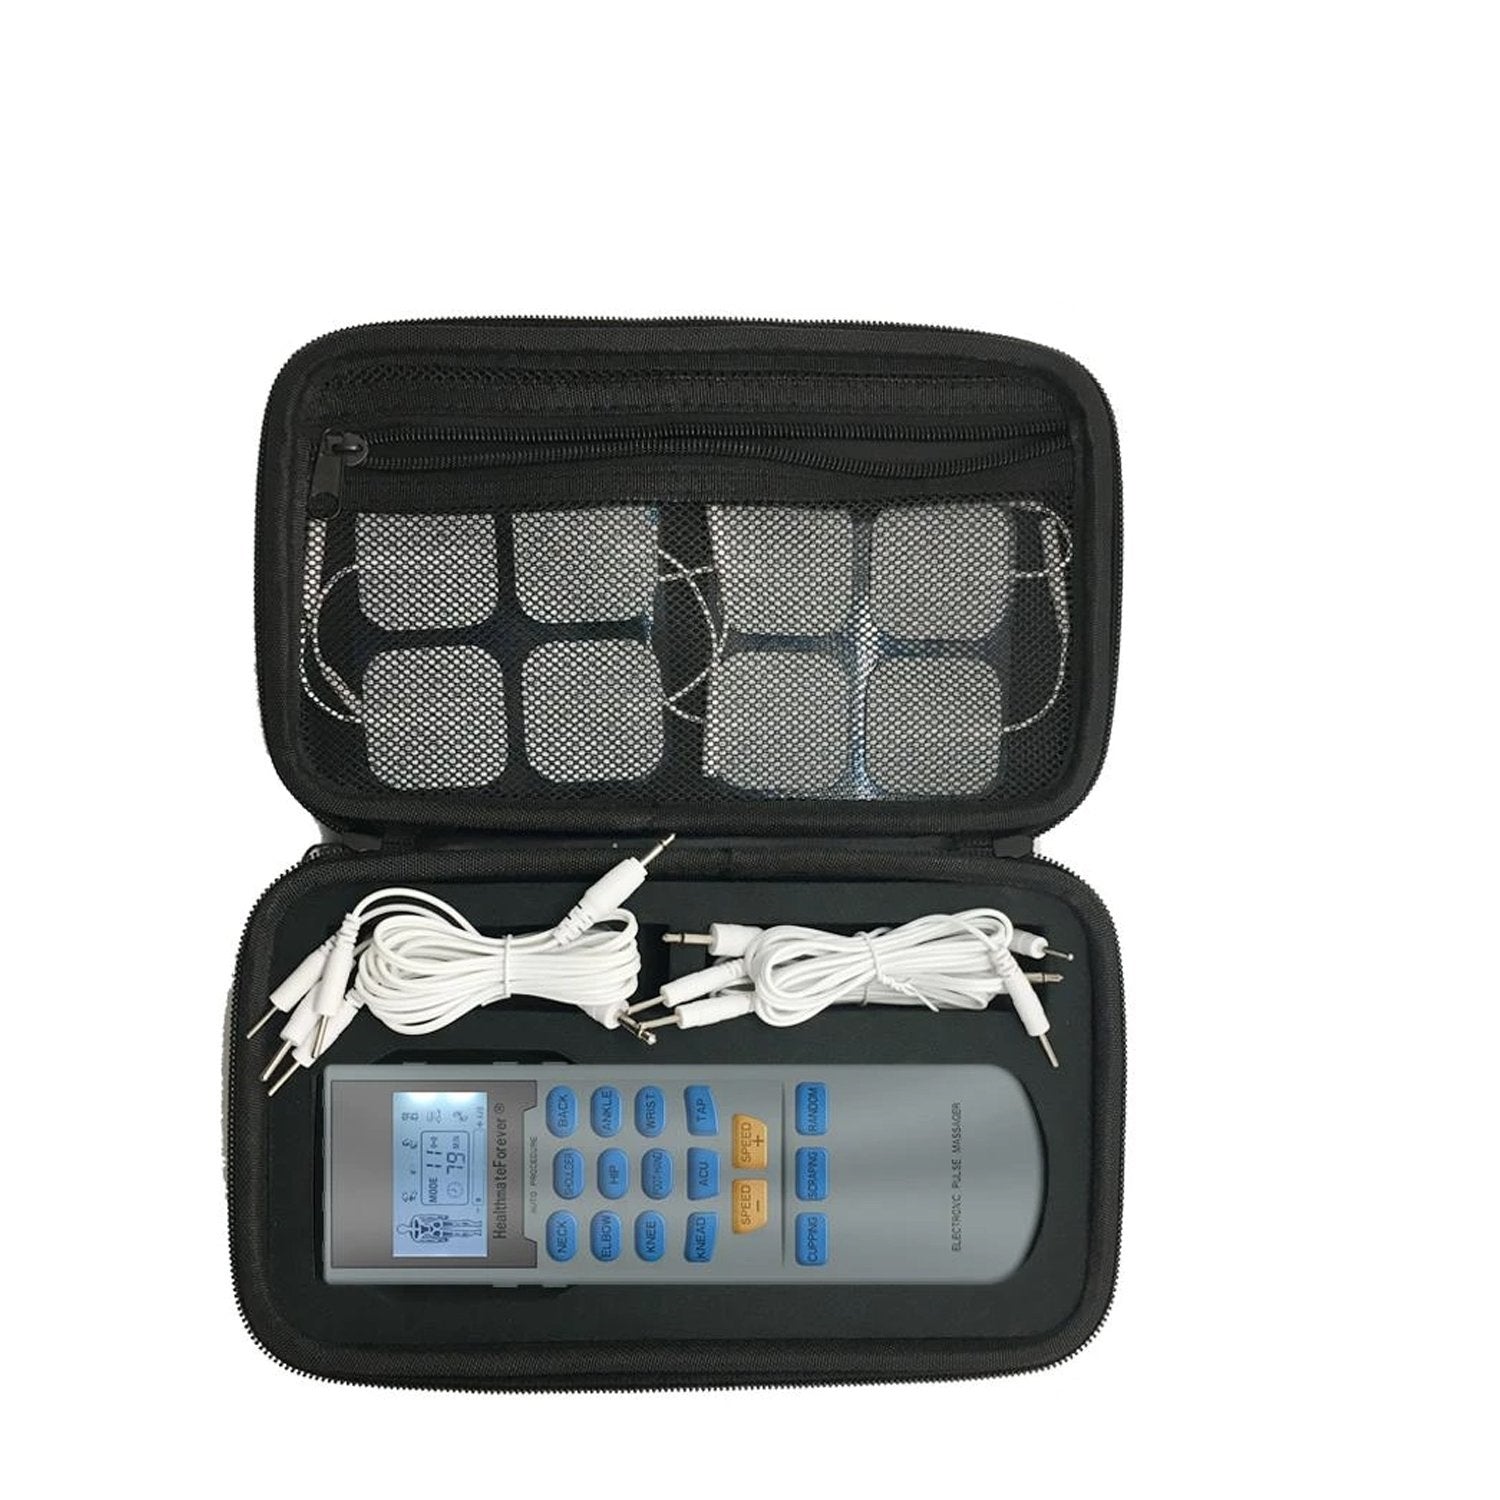 TENS unit purchase — Healthy Life Chiropractic